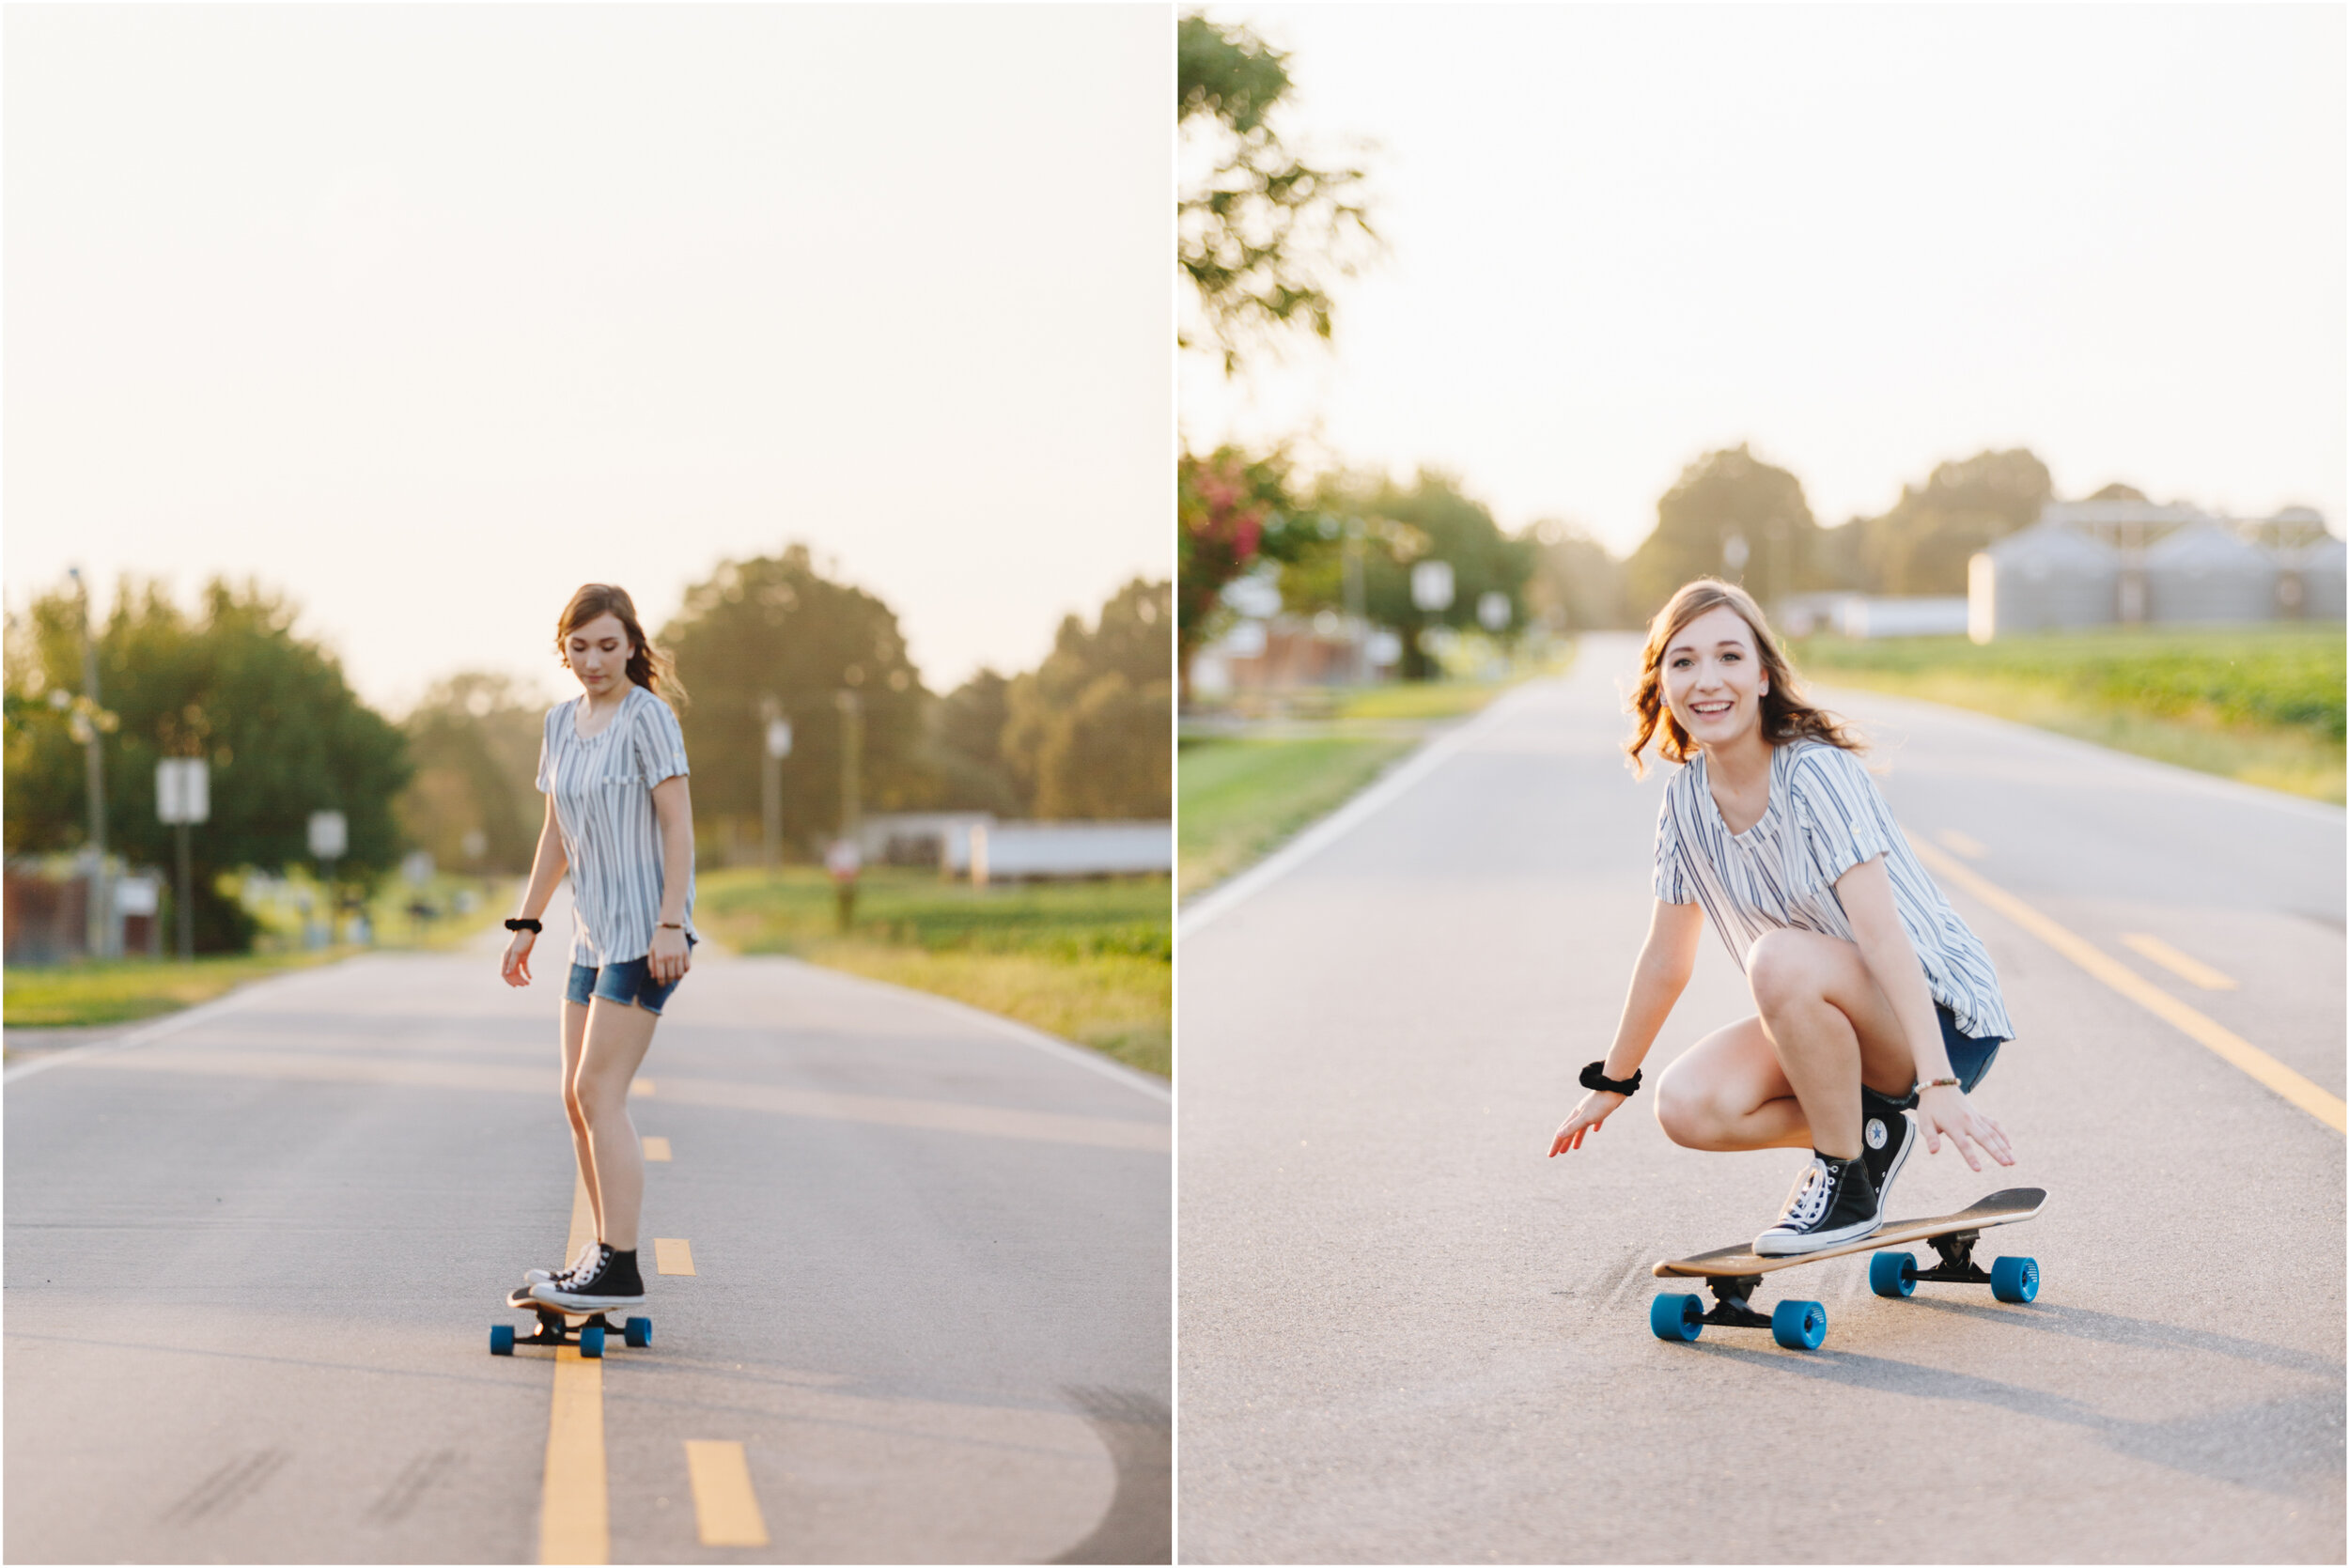 longboarding portraits in country